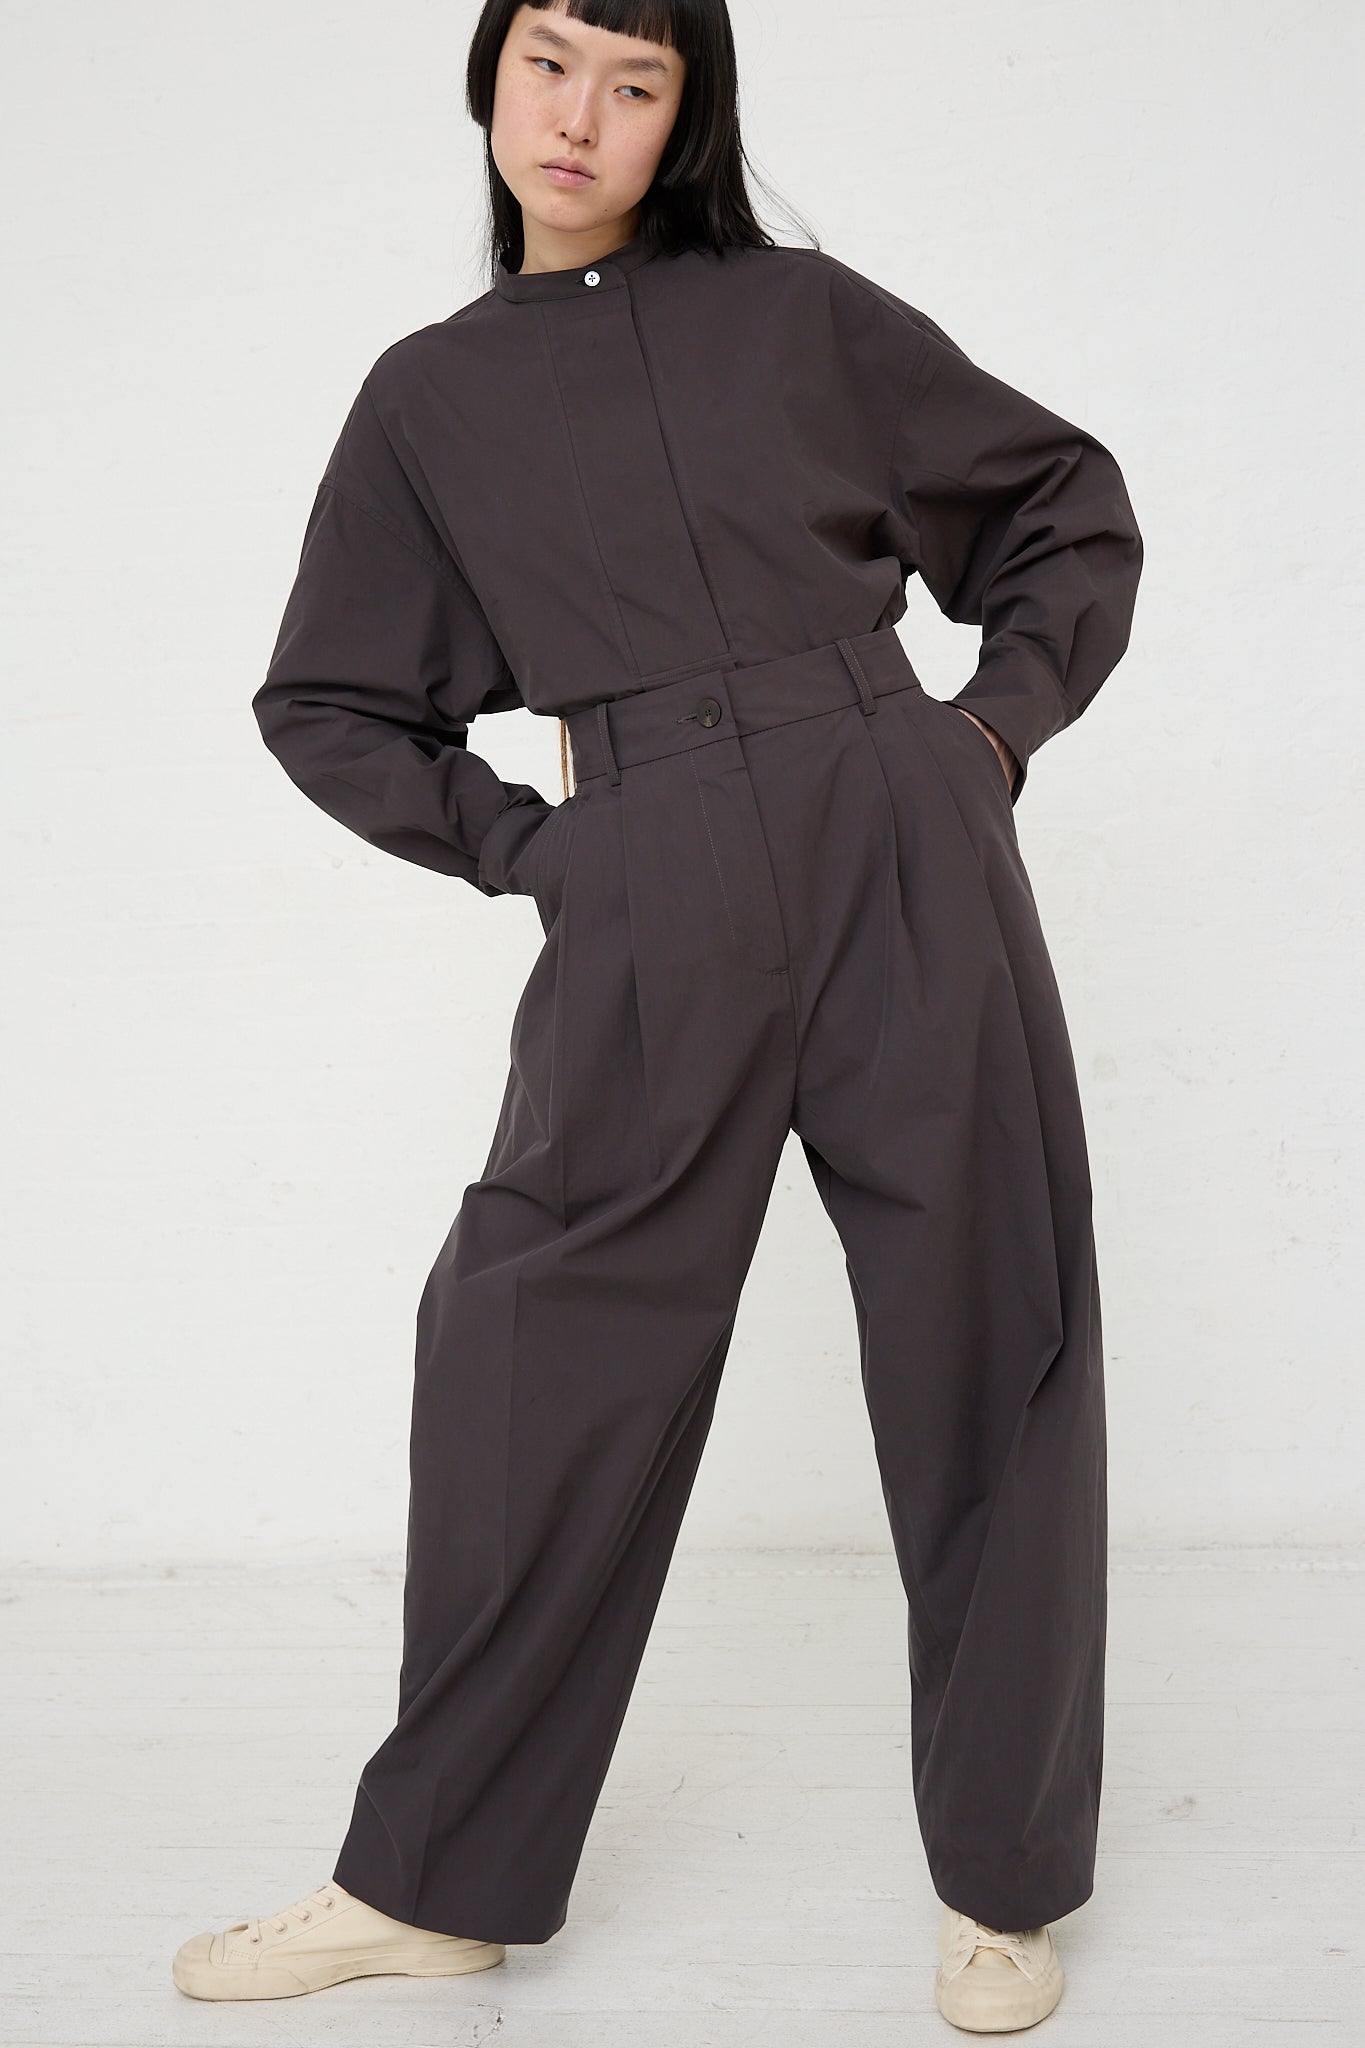 The model is wearing a Studio Nicholson Acuna Double Pleat Front Trouser in Asphalt. Front view and full length. Model's hands are in pockets.